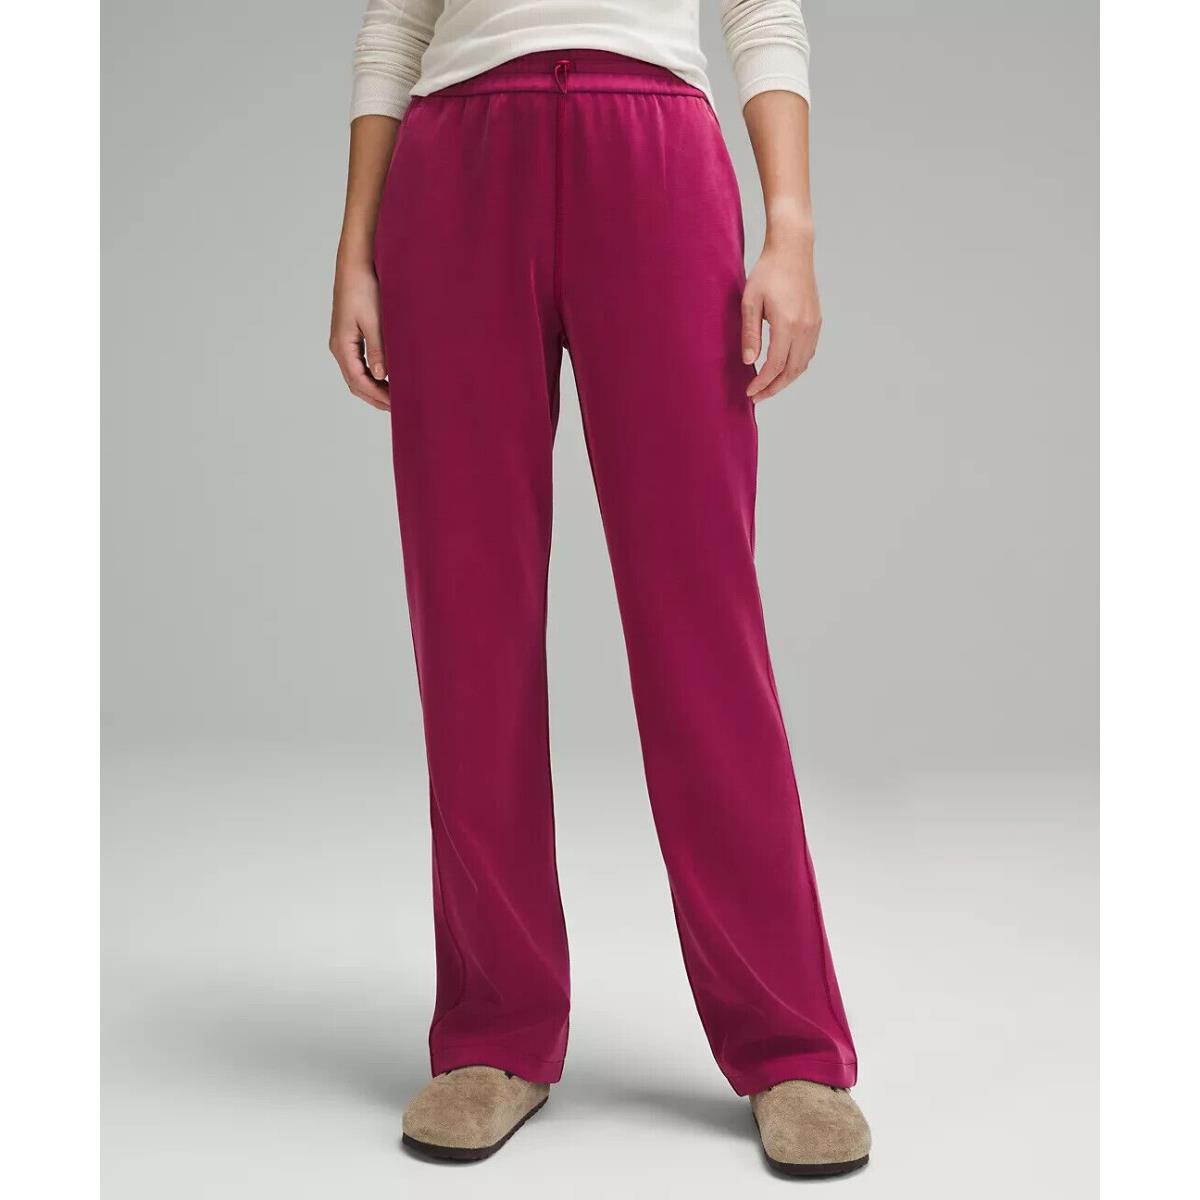 Lululemon Softstreme High-rise Pant Regular Color Deep Luxe Size 10